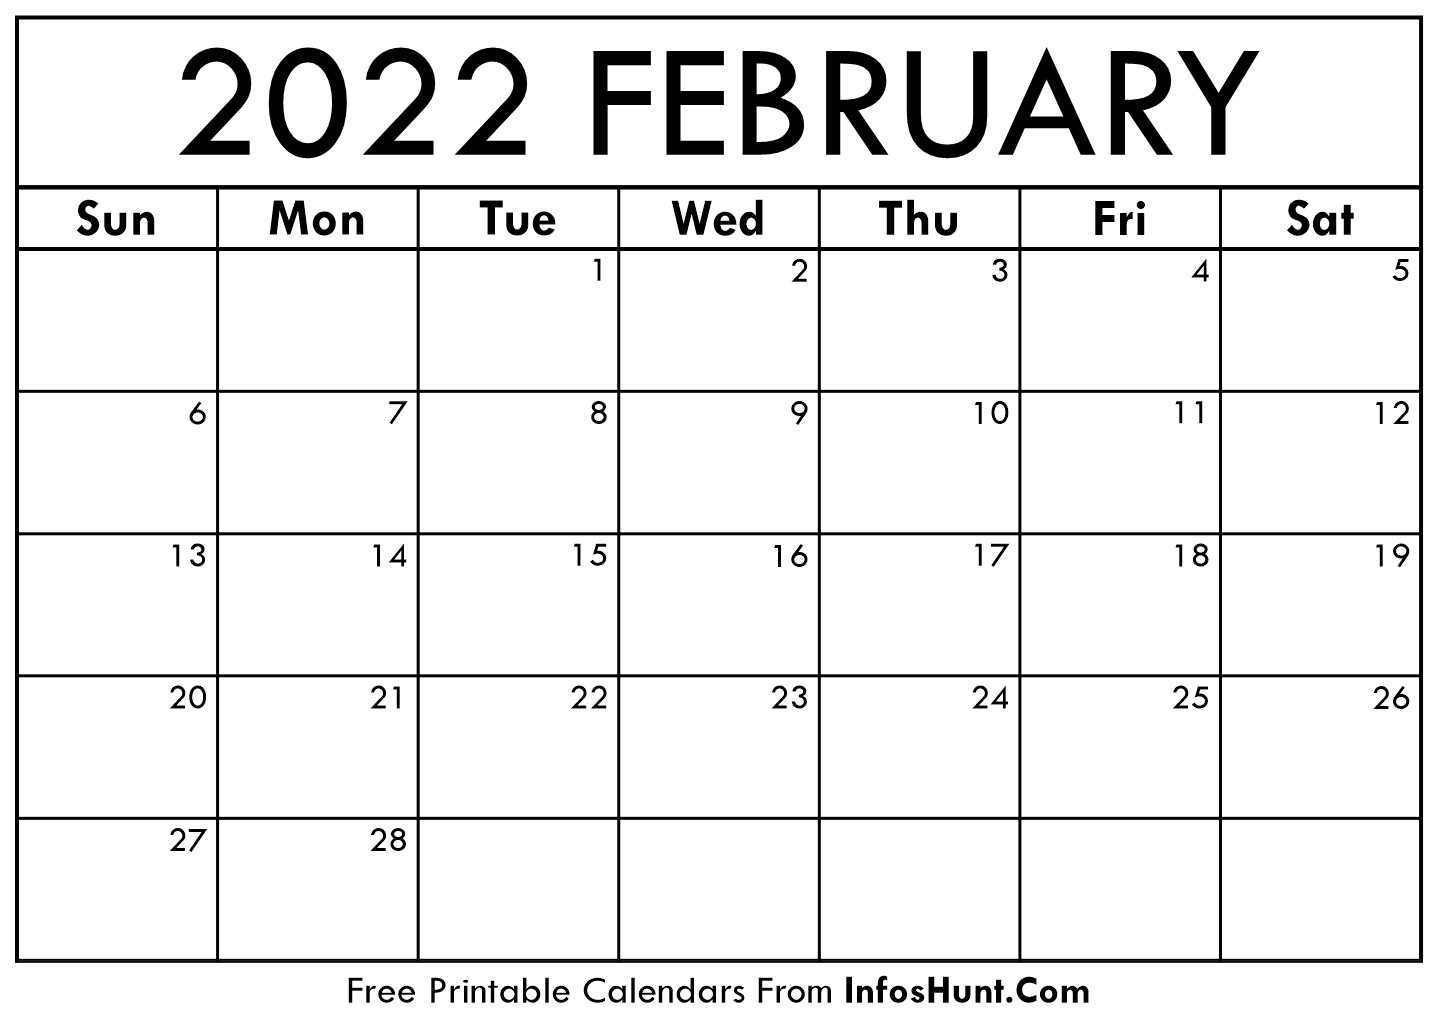 February 2022 Calendar Printable - Free Yearly &amp; Monthly Calendar 2021-Time And Date Calendar Canada 2022